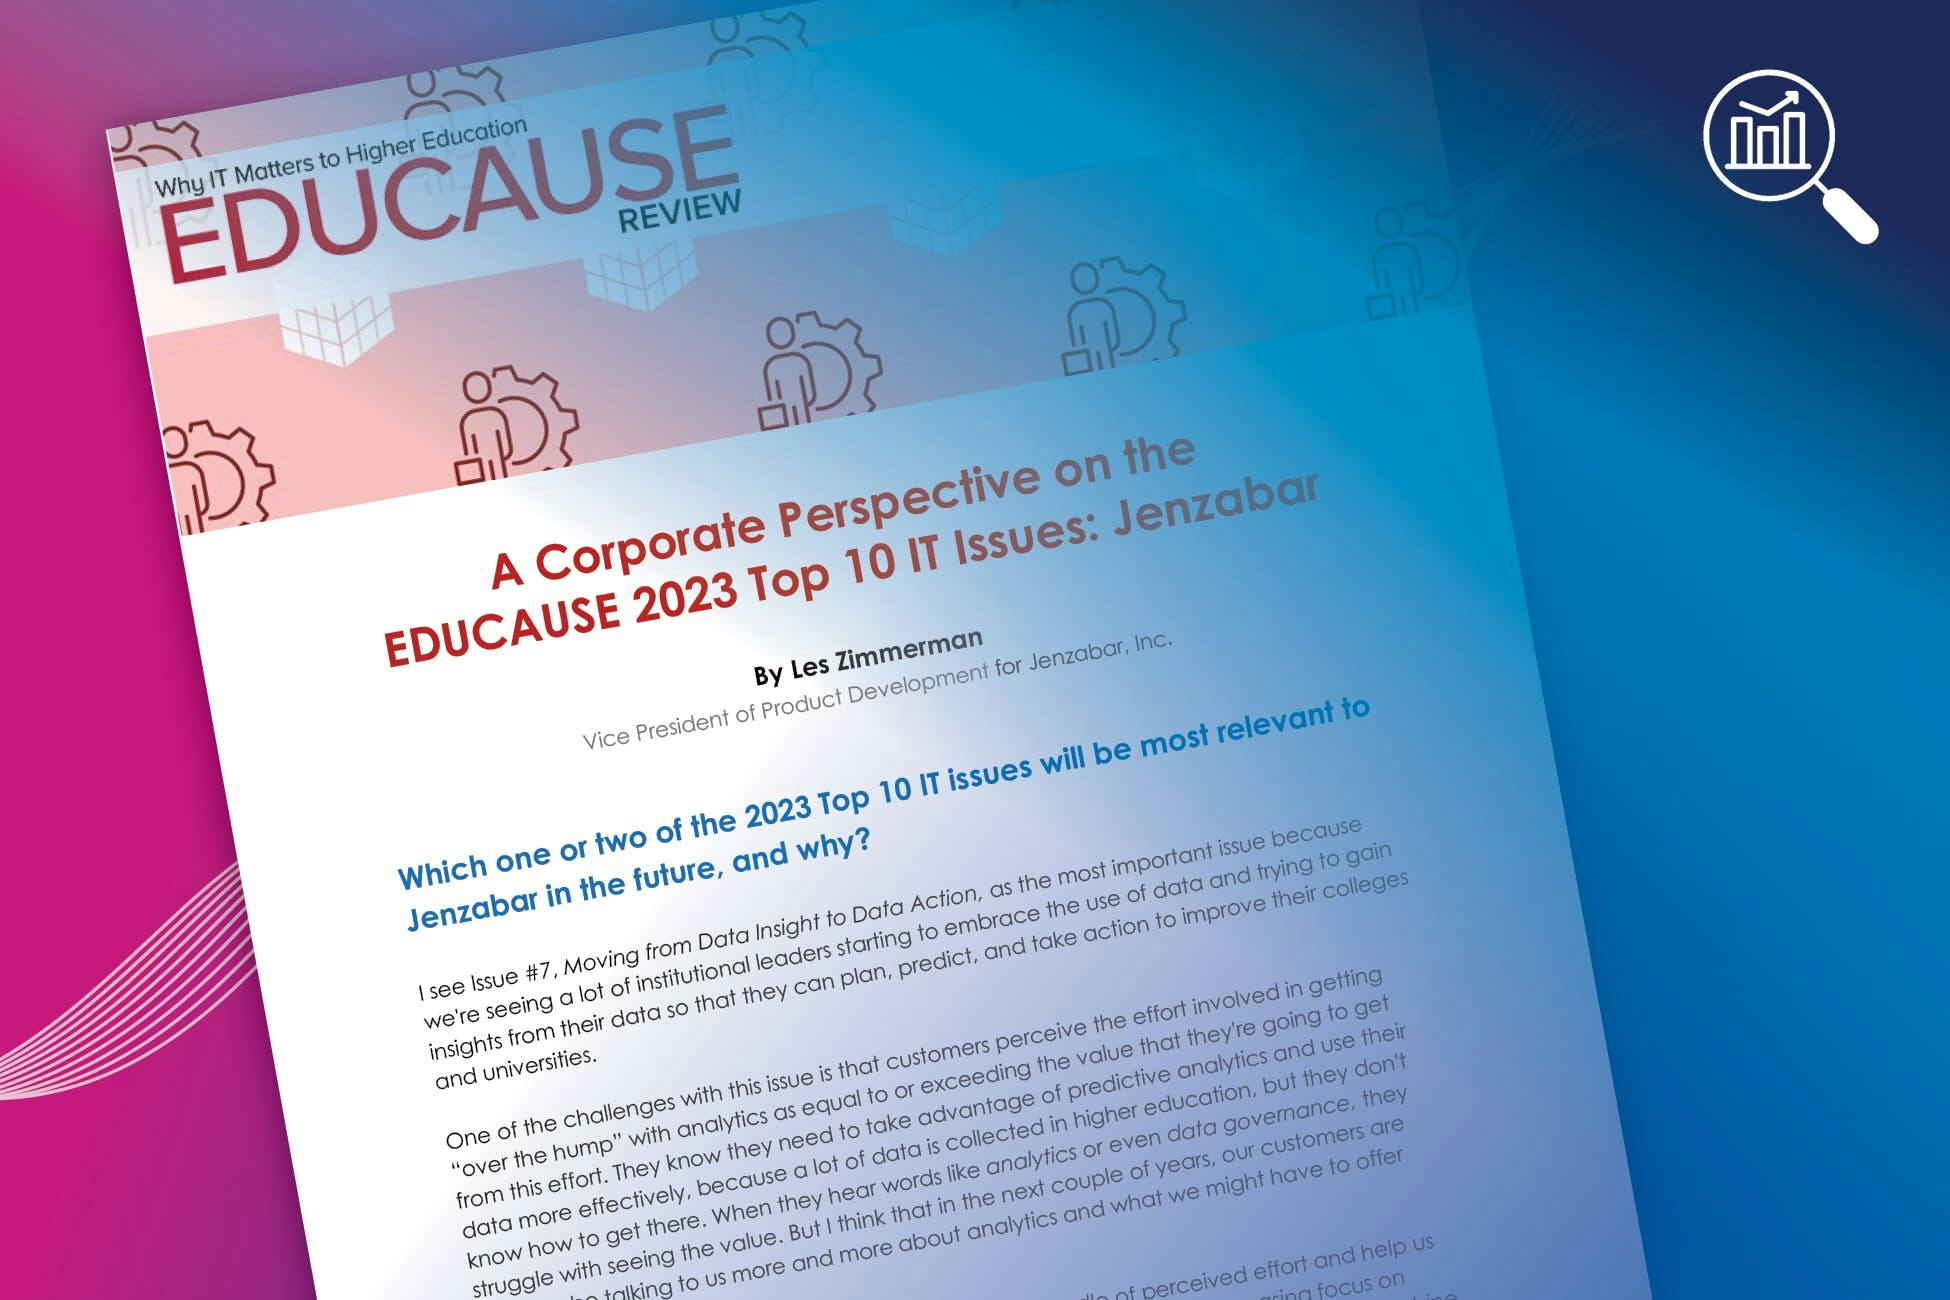 Jenzabar's Perspective on the EDUCAUSE 2023 Top 10 IT Issues